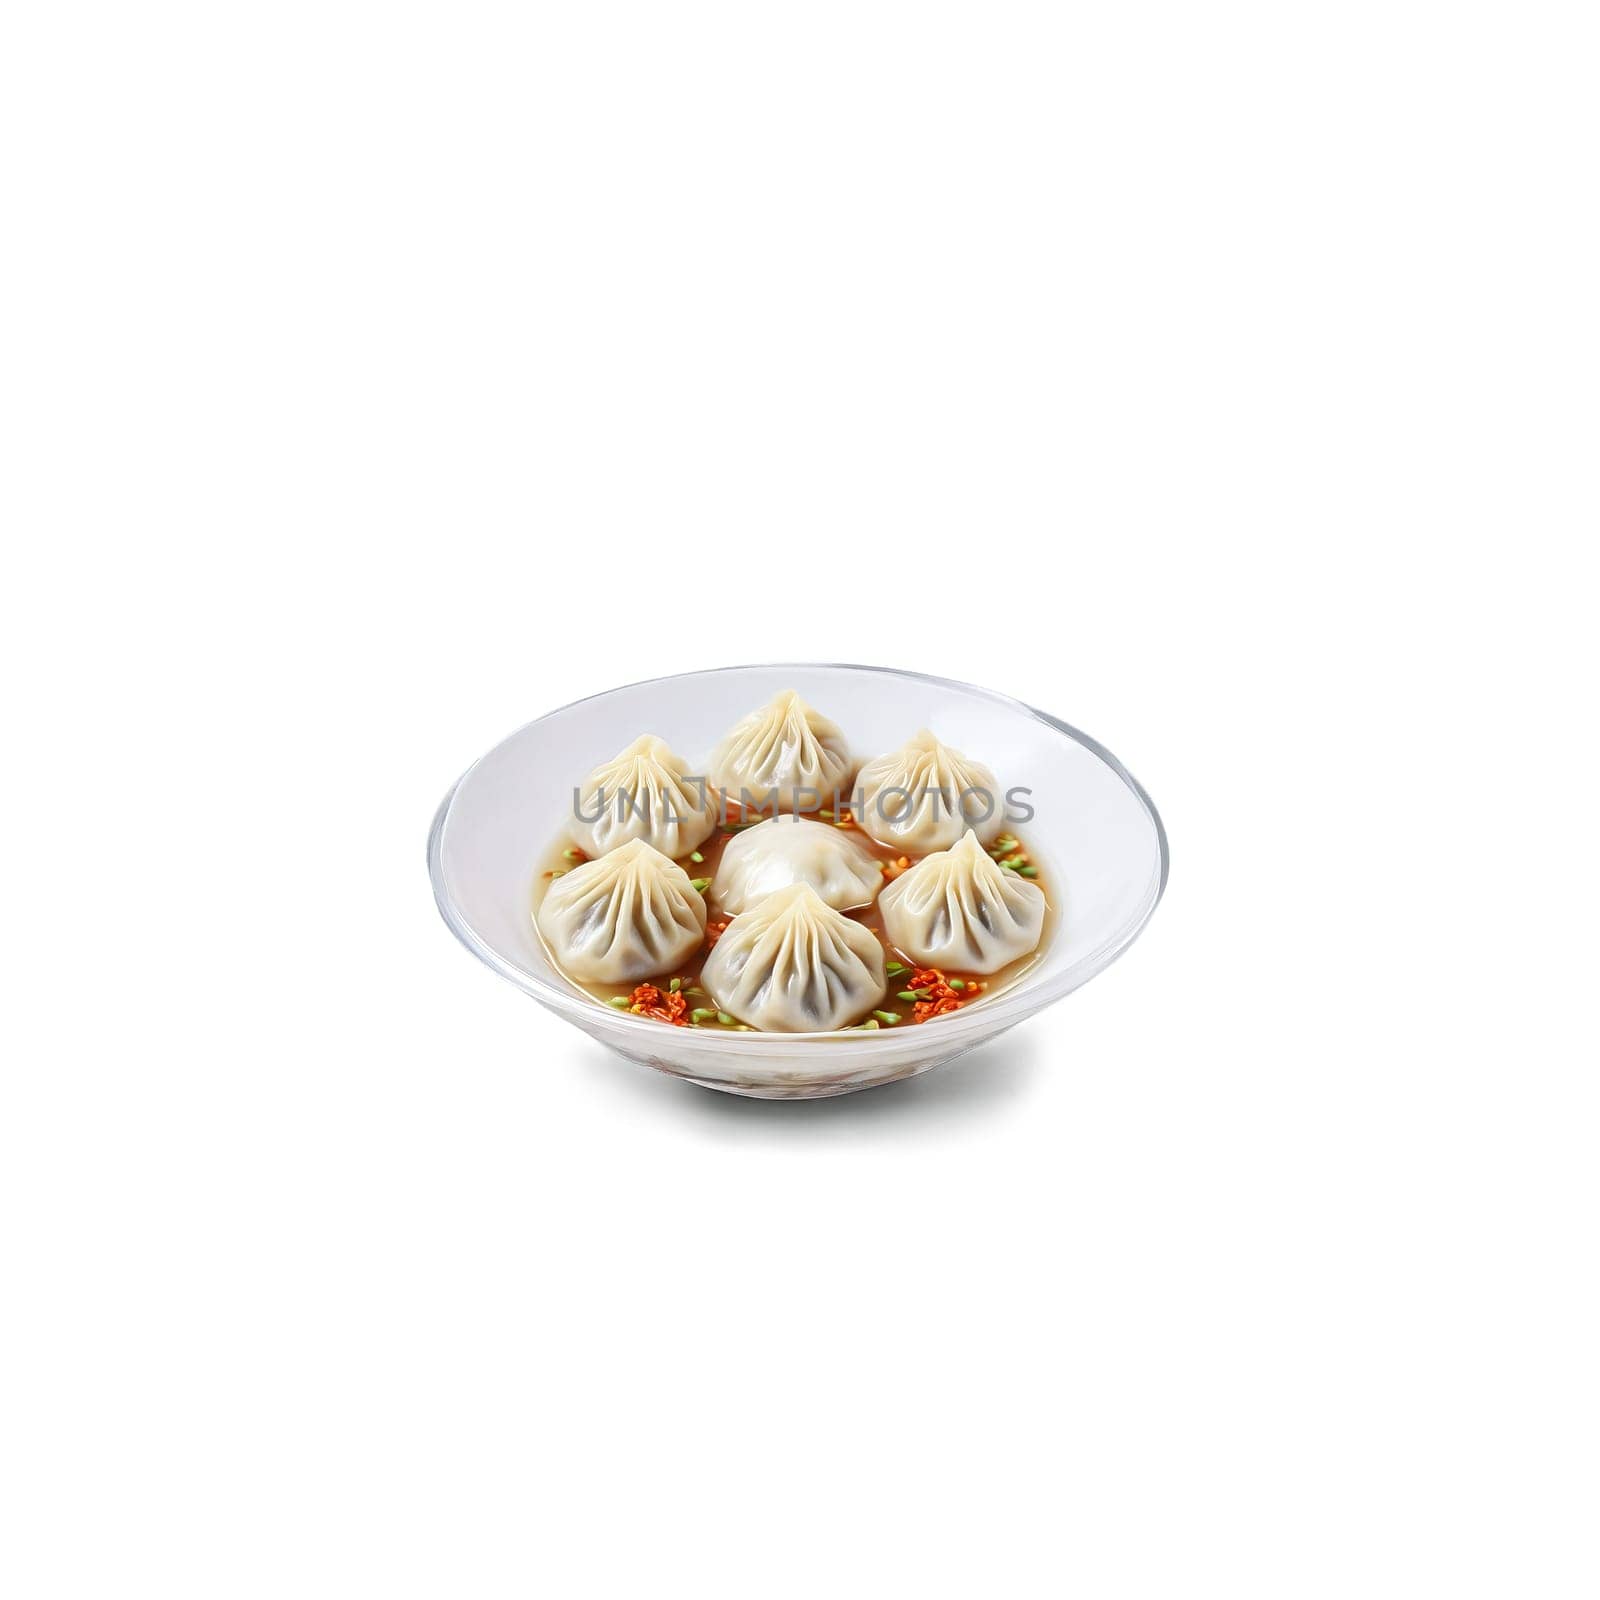 Xiaolongbao soup dumplings with translucent wrapper soup inside floating Food and culinary concept. Food isolated on transparent background.